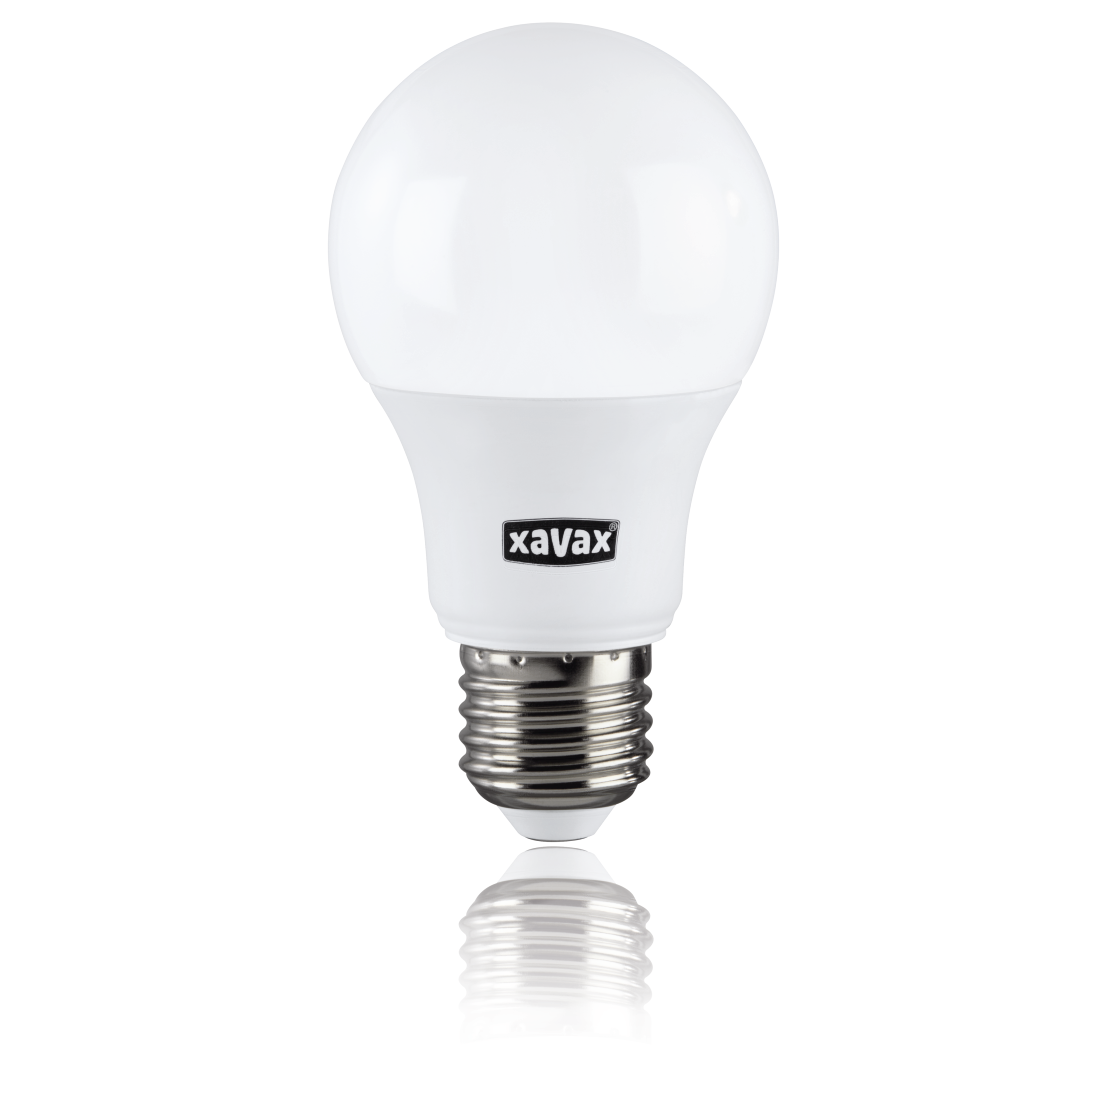 abx2 High-Res Image 2 - Xavax, LED Bulb, E27, 470lm replaces 40W, incandescent bulb, warm white, RA90